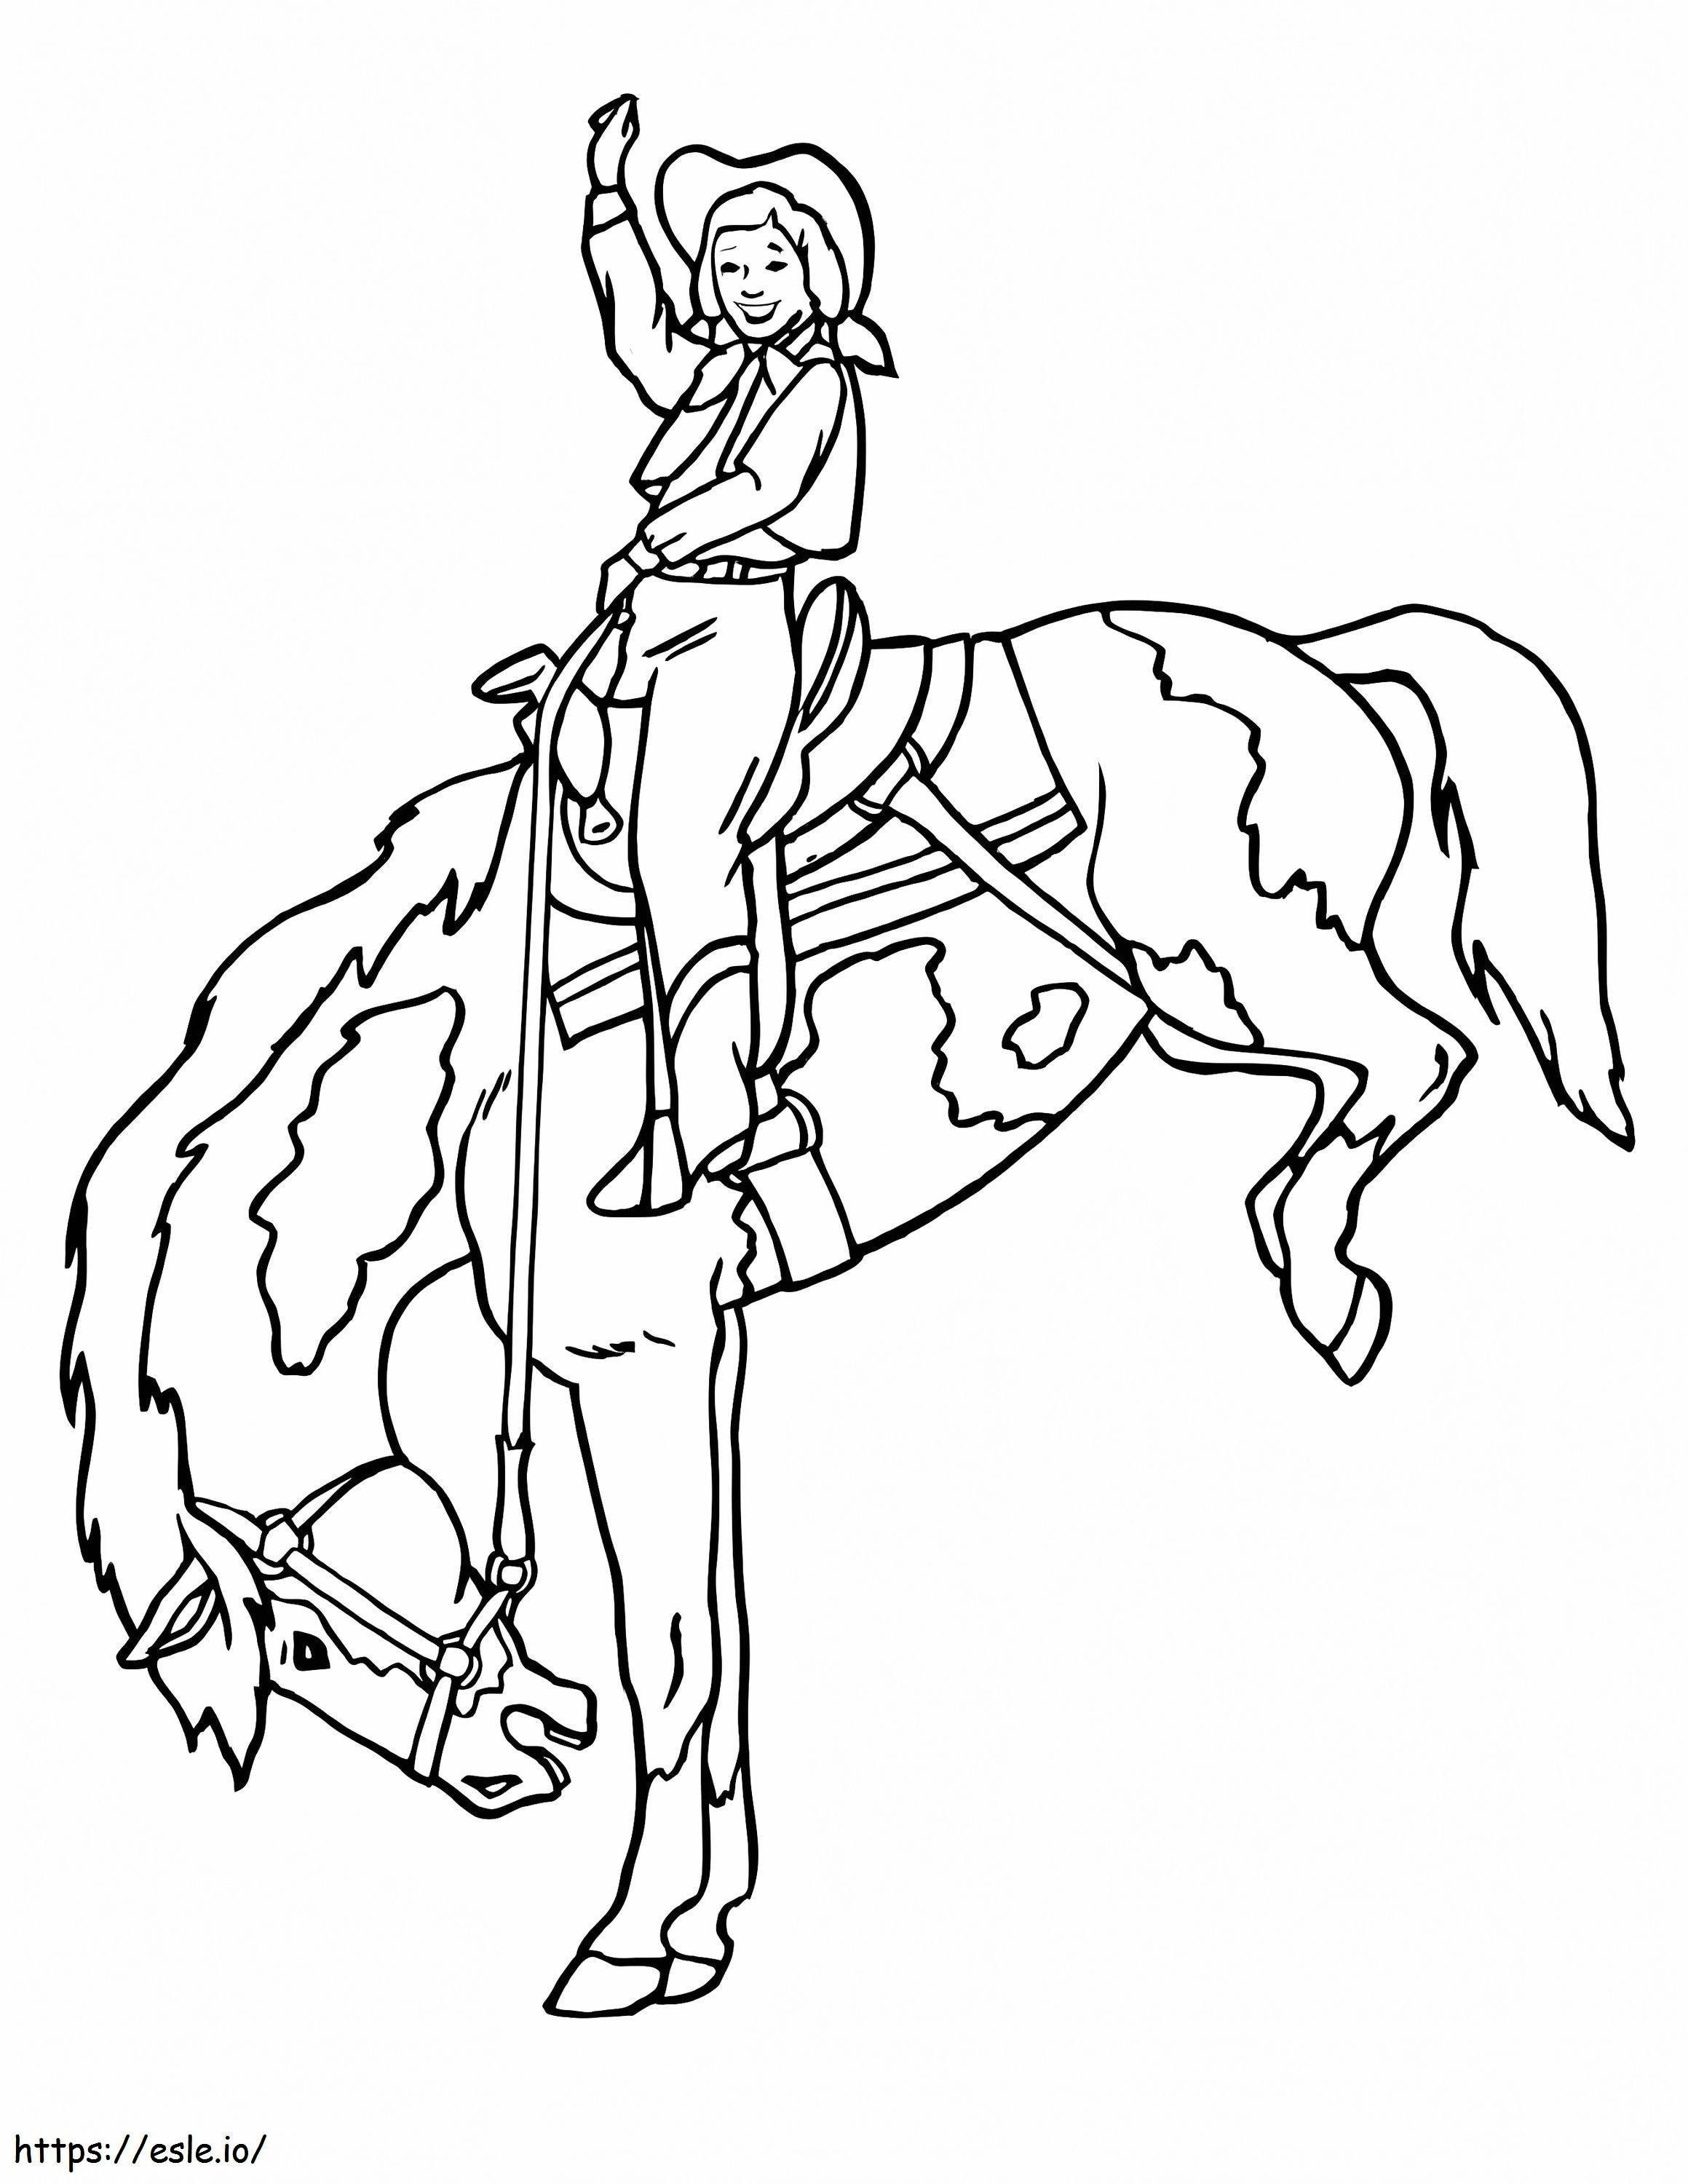 Cowgirl Is Happy coloring page